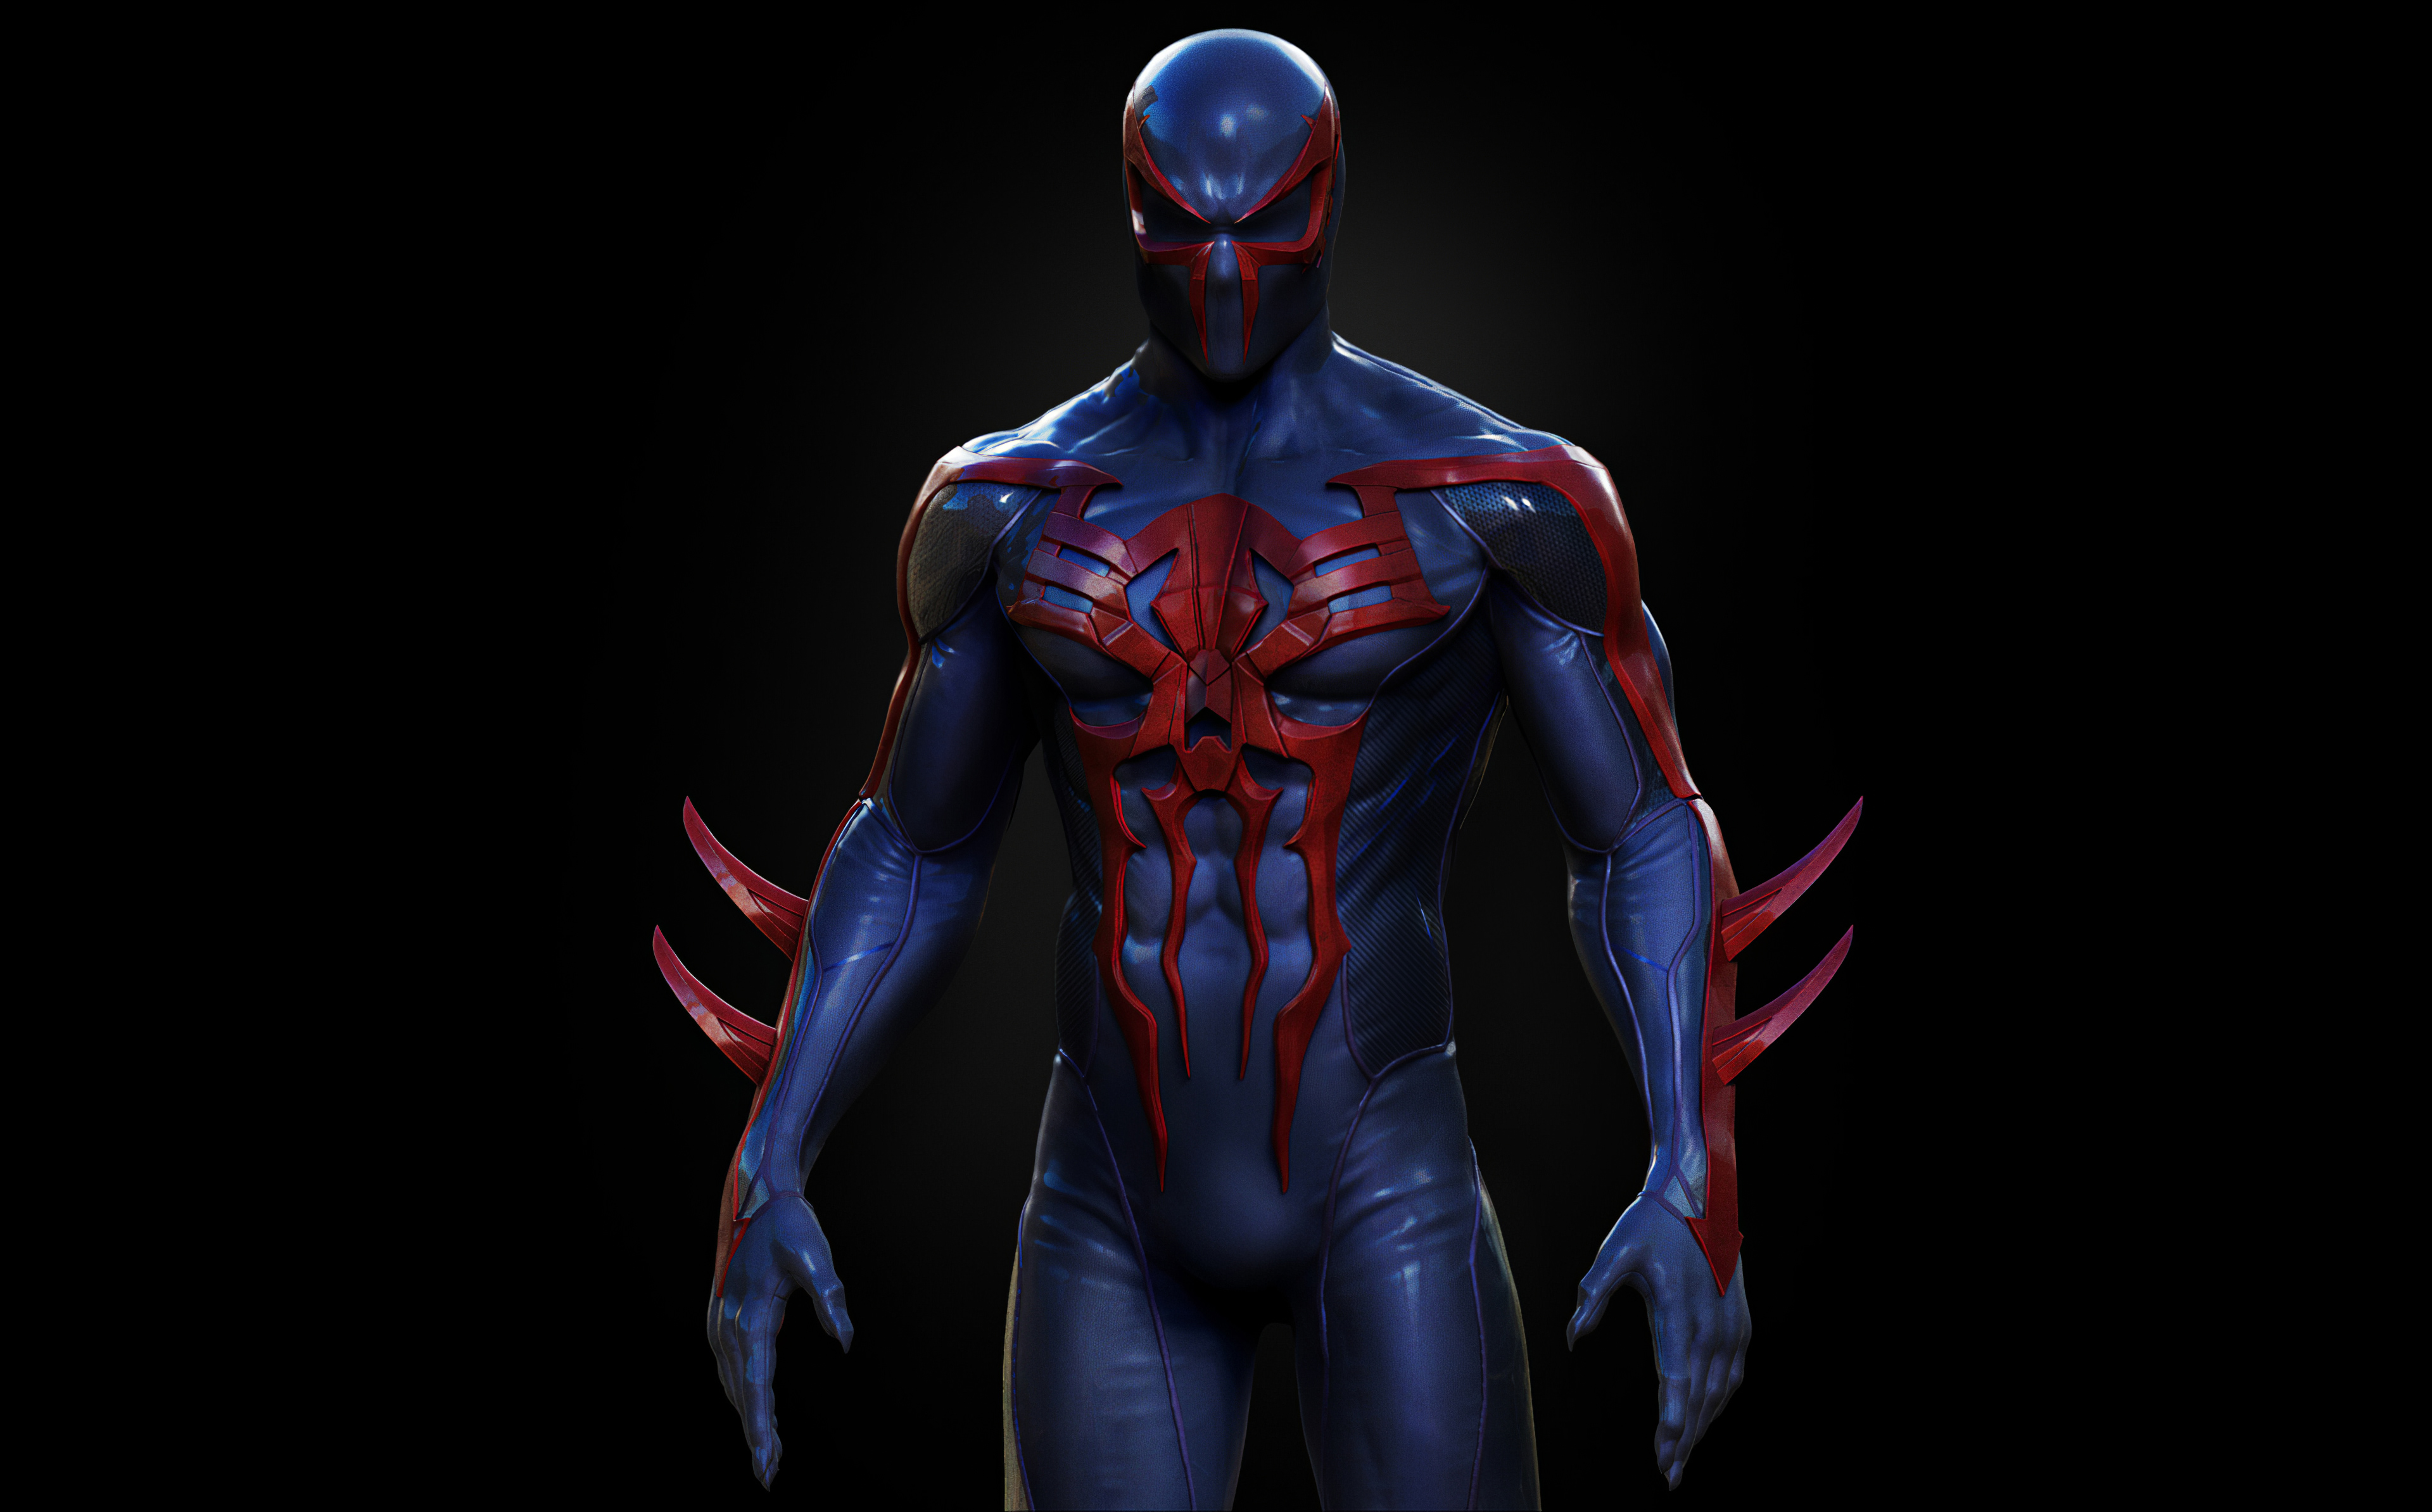 picture Ultra Hd Spider Man 2099 Wallpaper spiderman 2099 4k 2020 hd supe.....